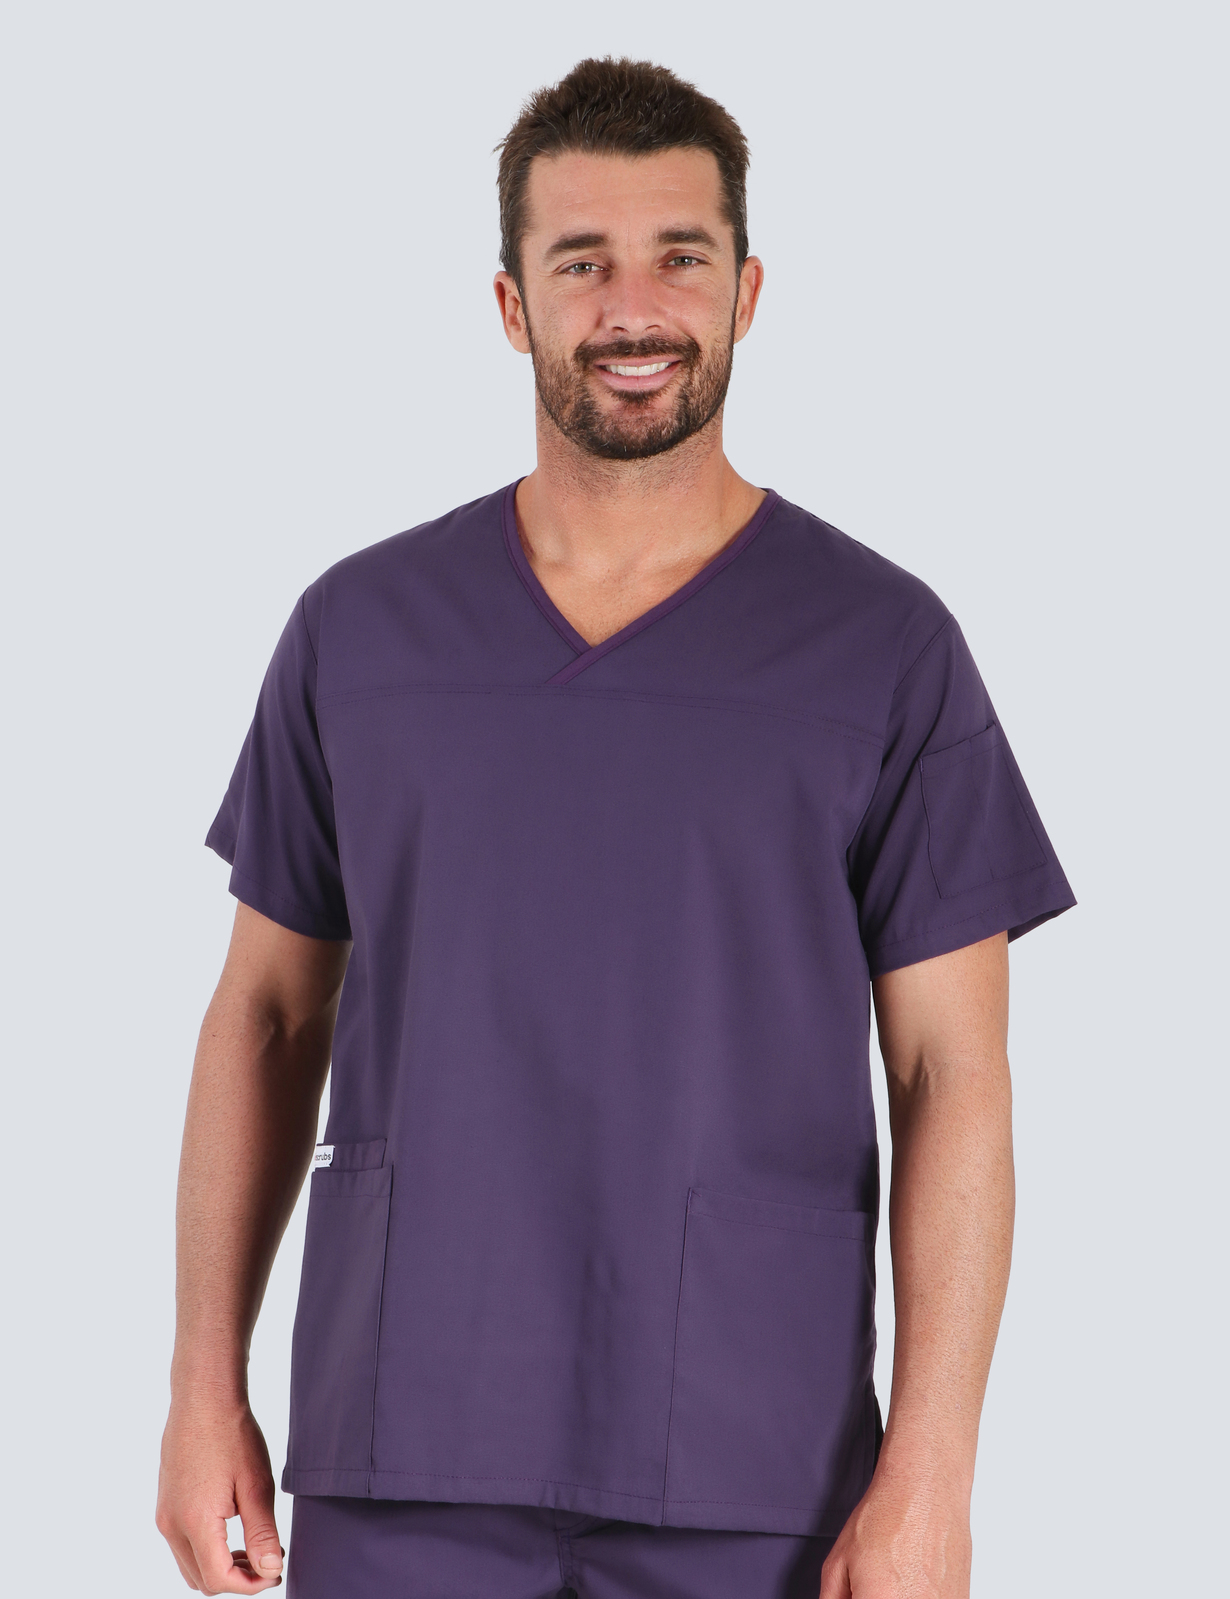 Men's Fit Scrub Top Redand Hospital - Pharmacist (top only)